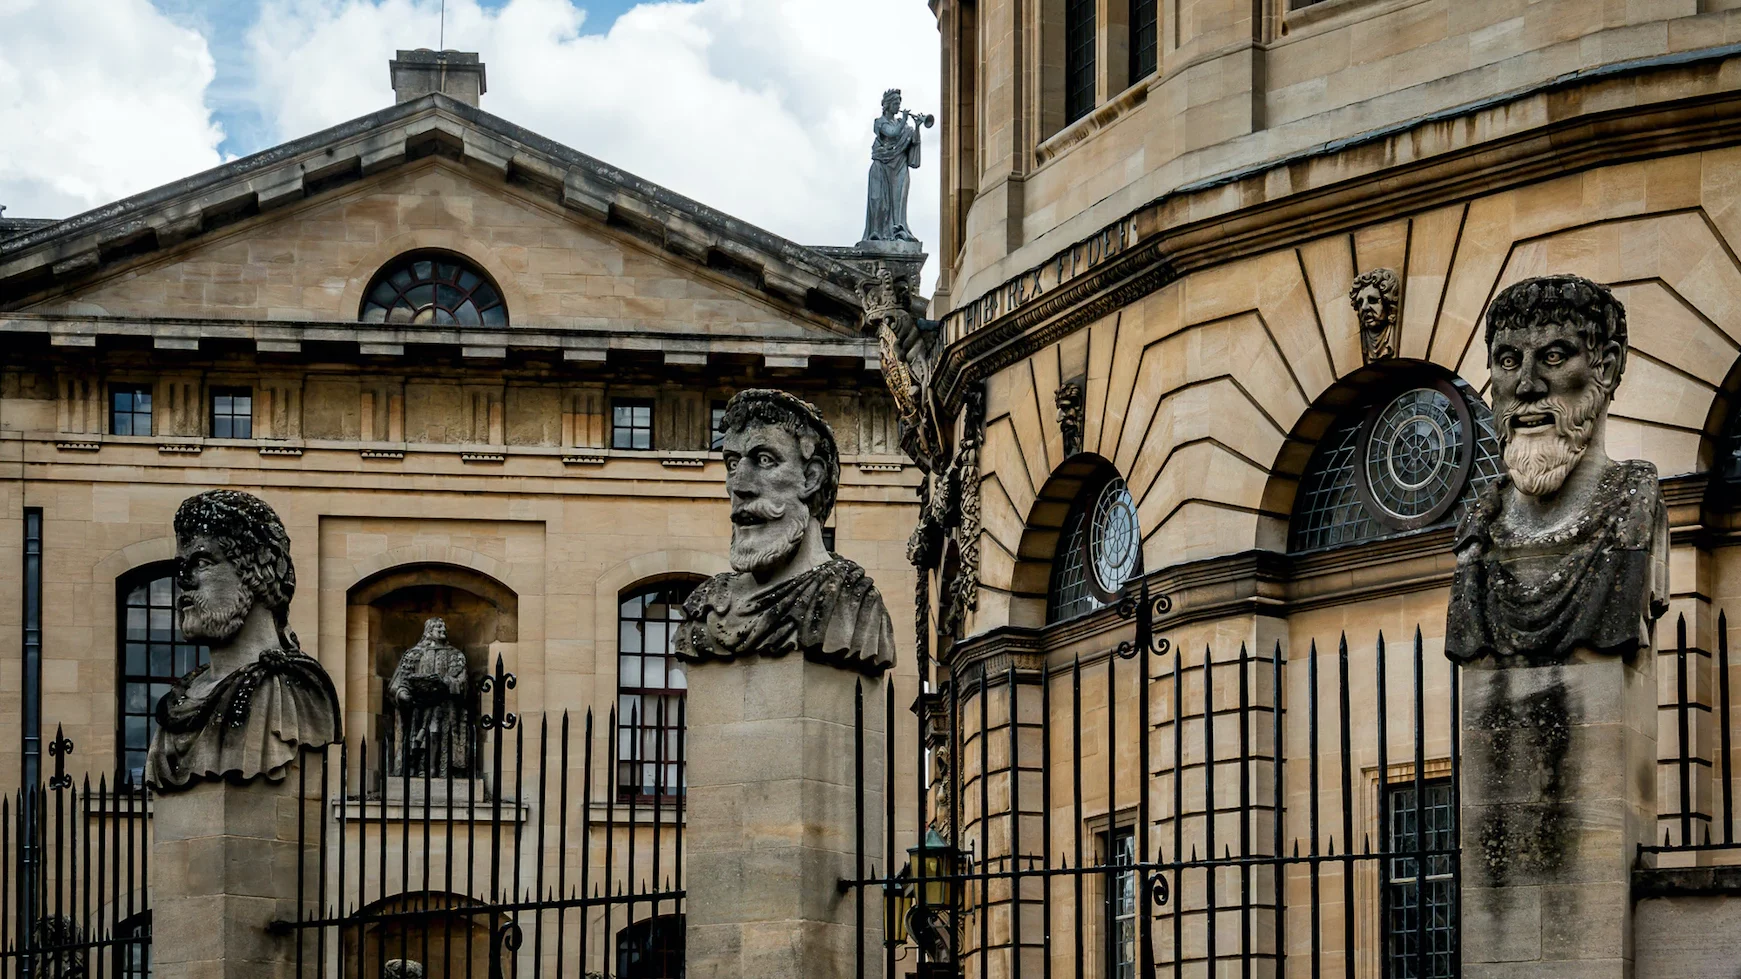 Image of the Bodleian libraries